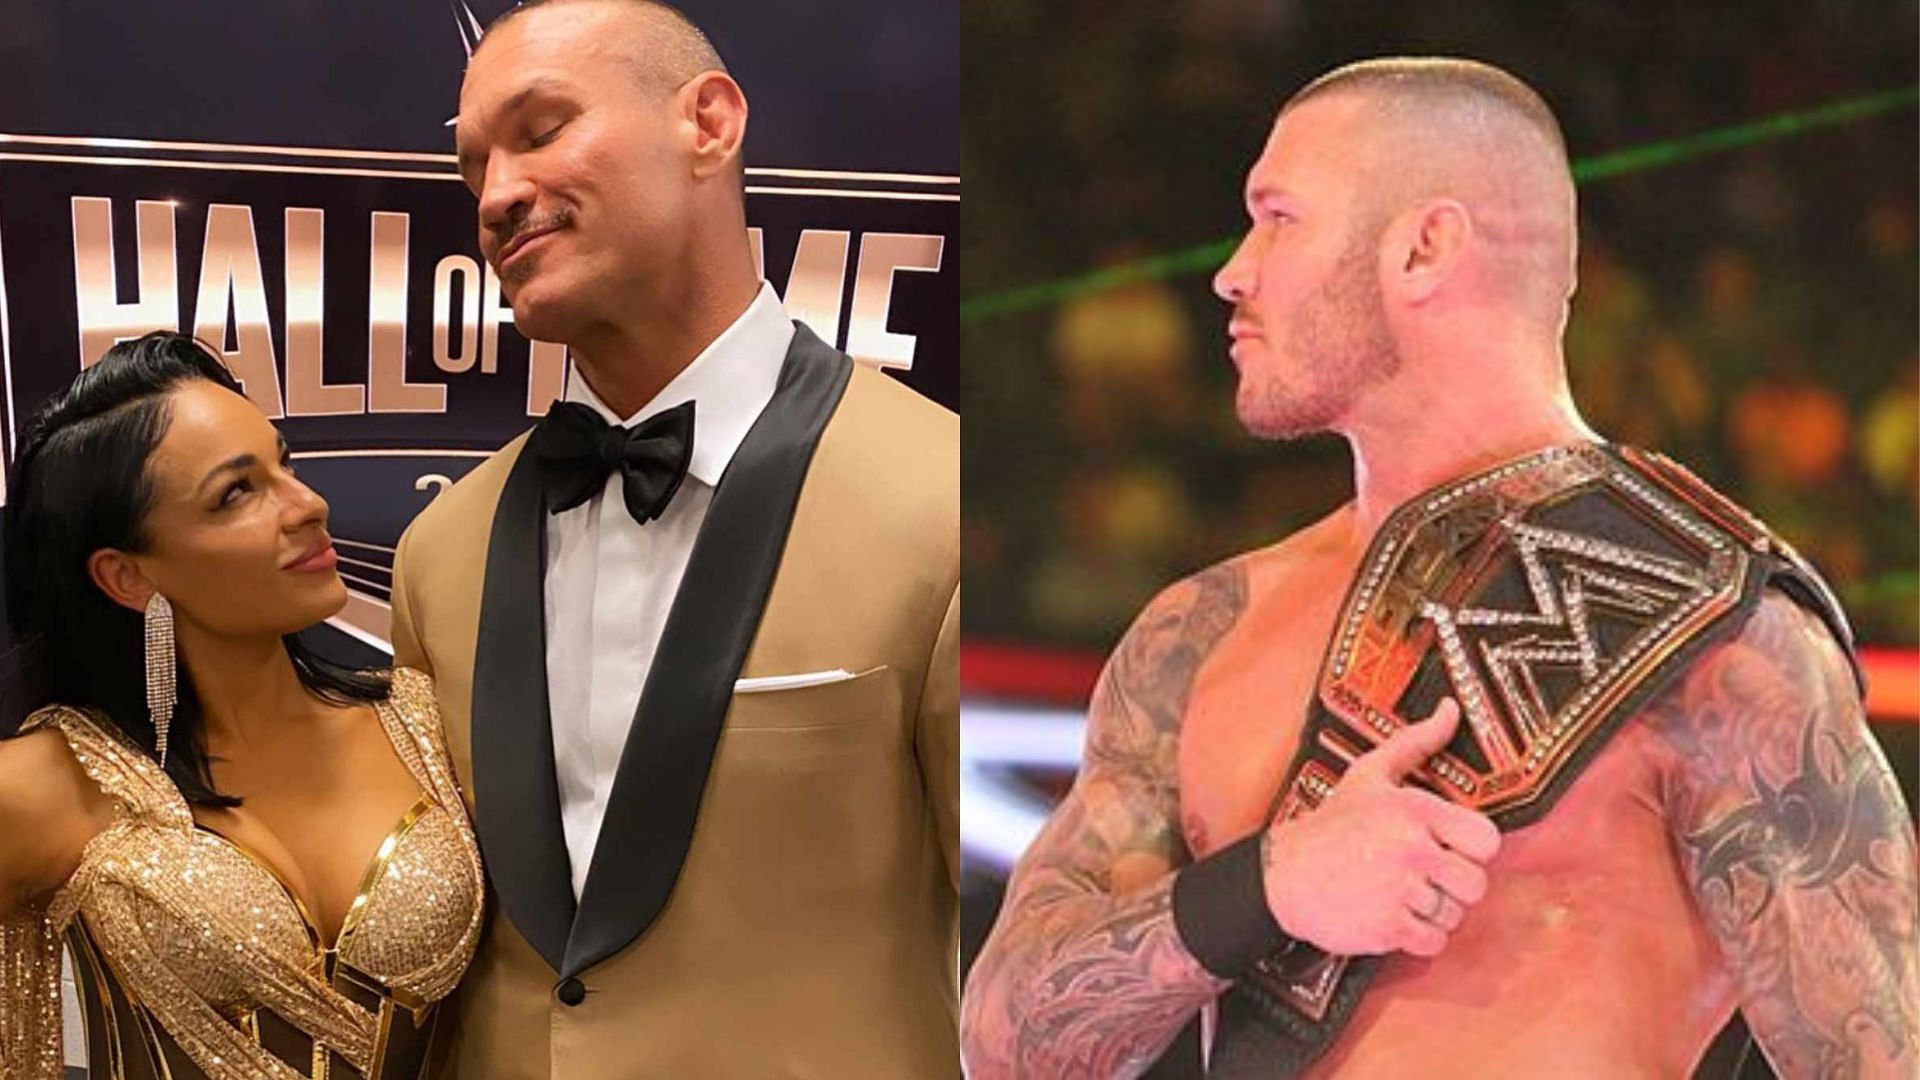 Randy Orton is still recovering from his long-term injury